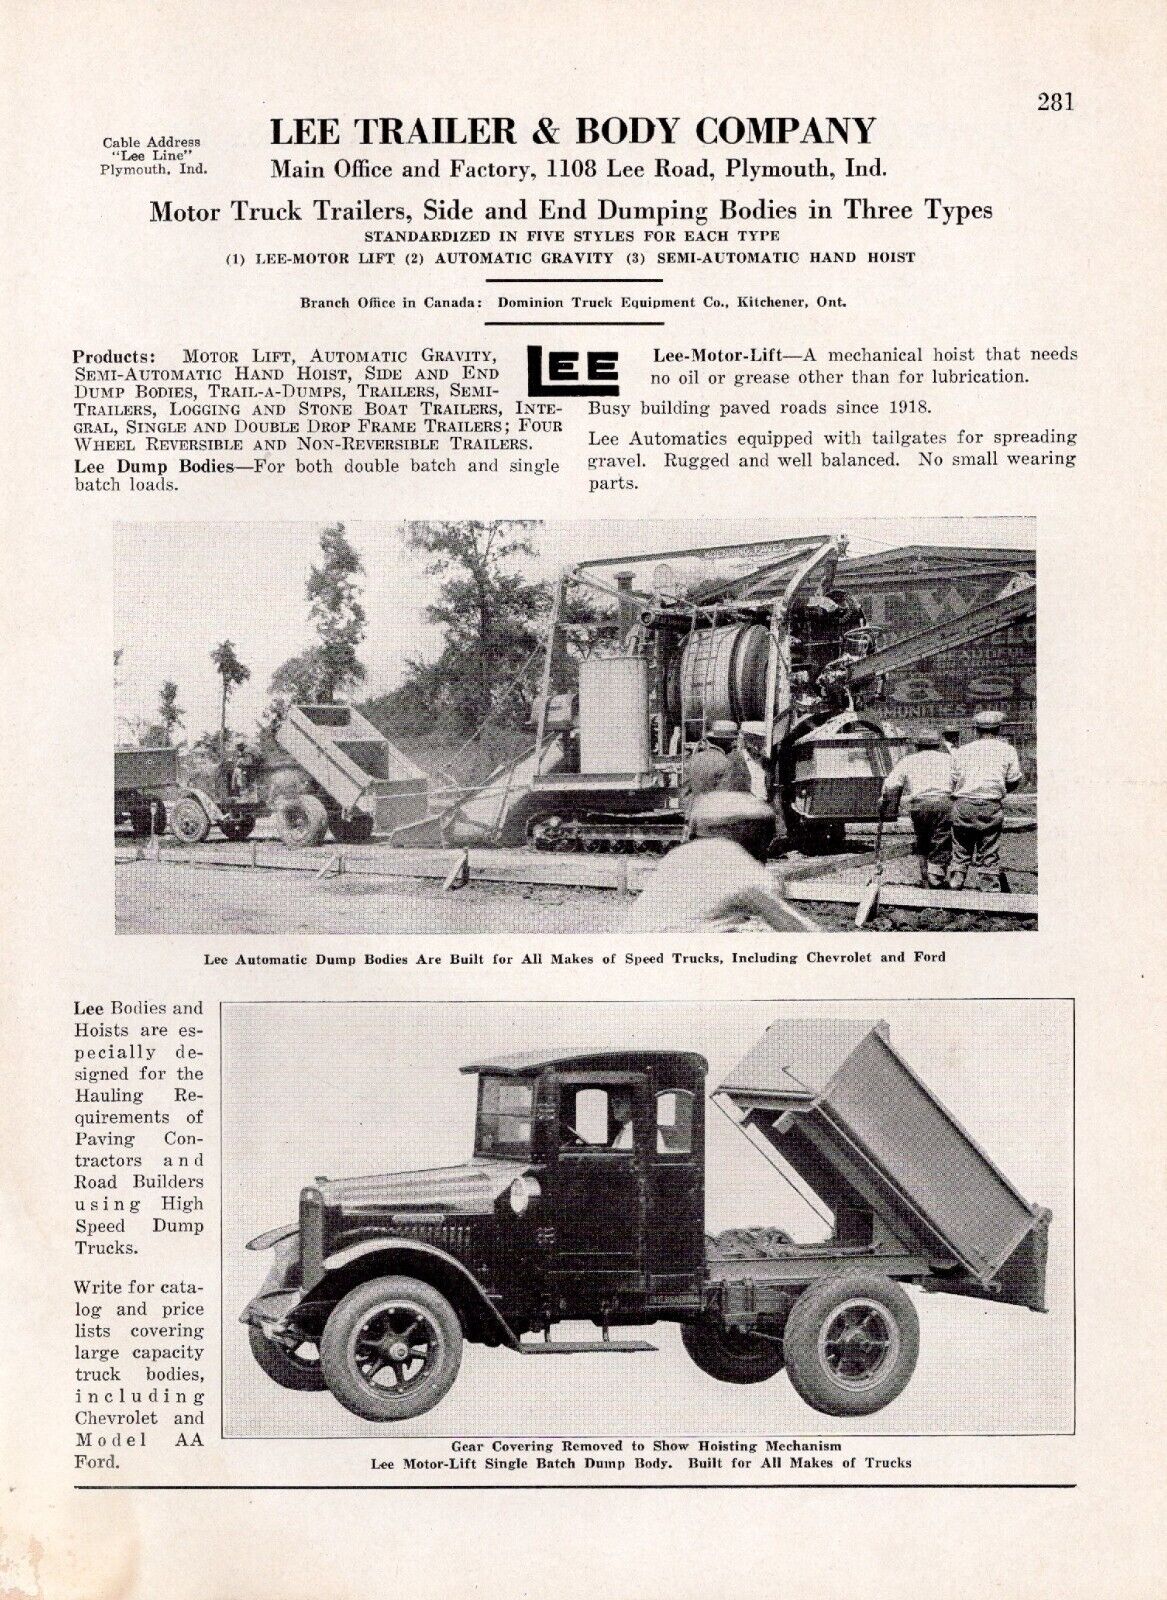 1928 Lee Trailer and Body Vintage Print Ad Plymouth Indiana End Dumping Bodies